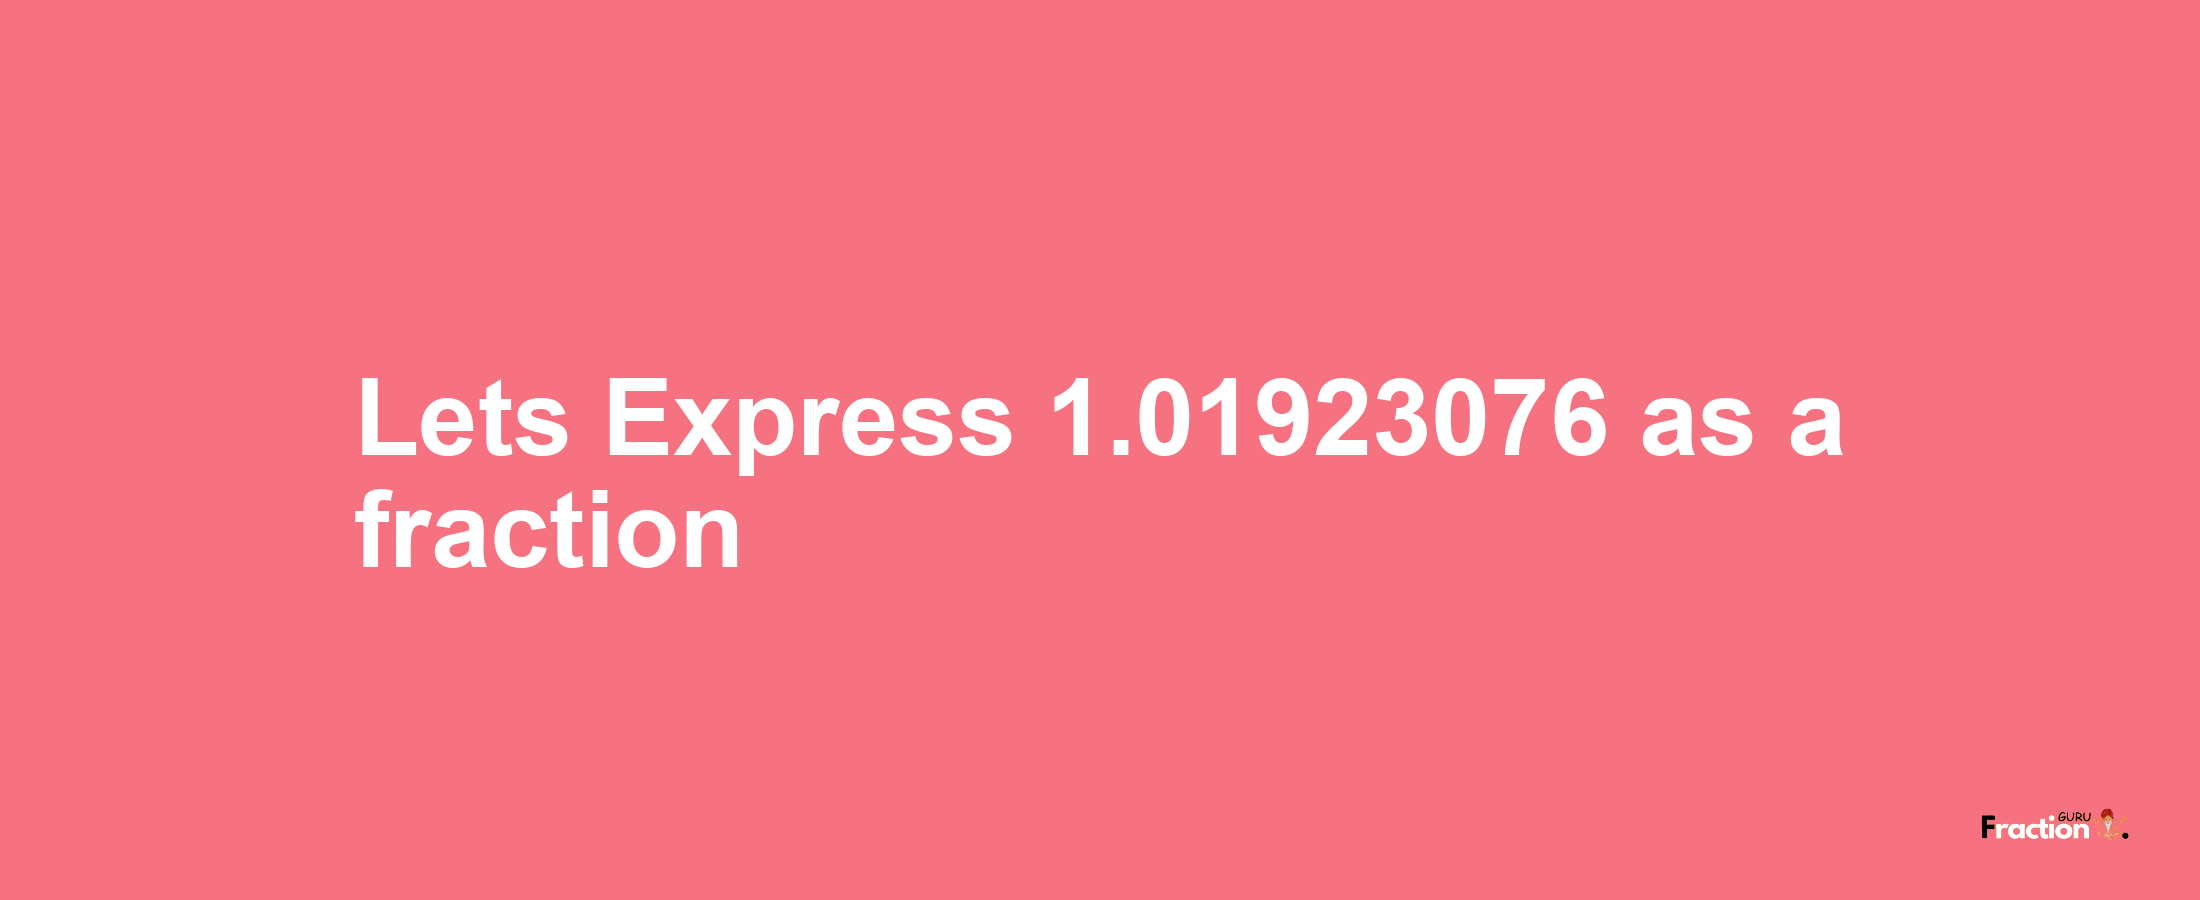 Lets Express 1.01923076 as afraction